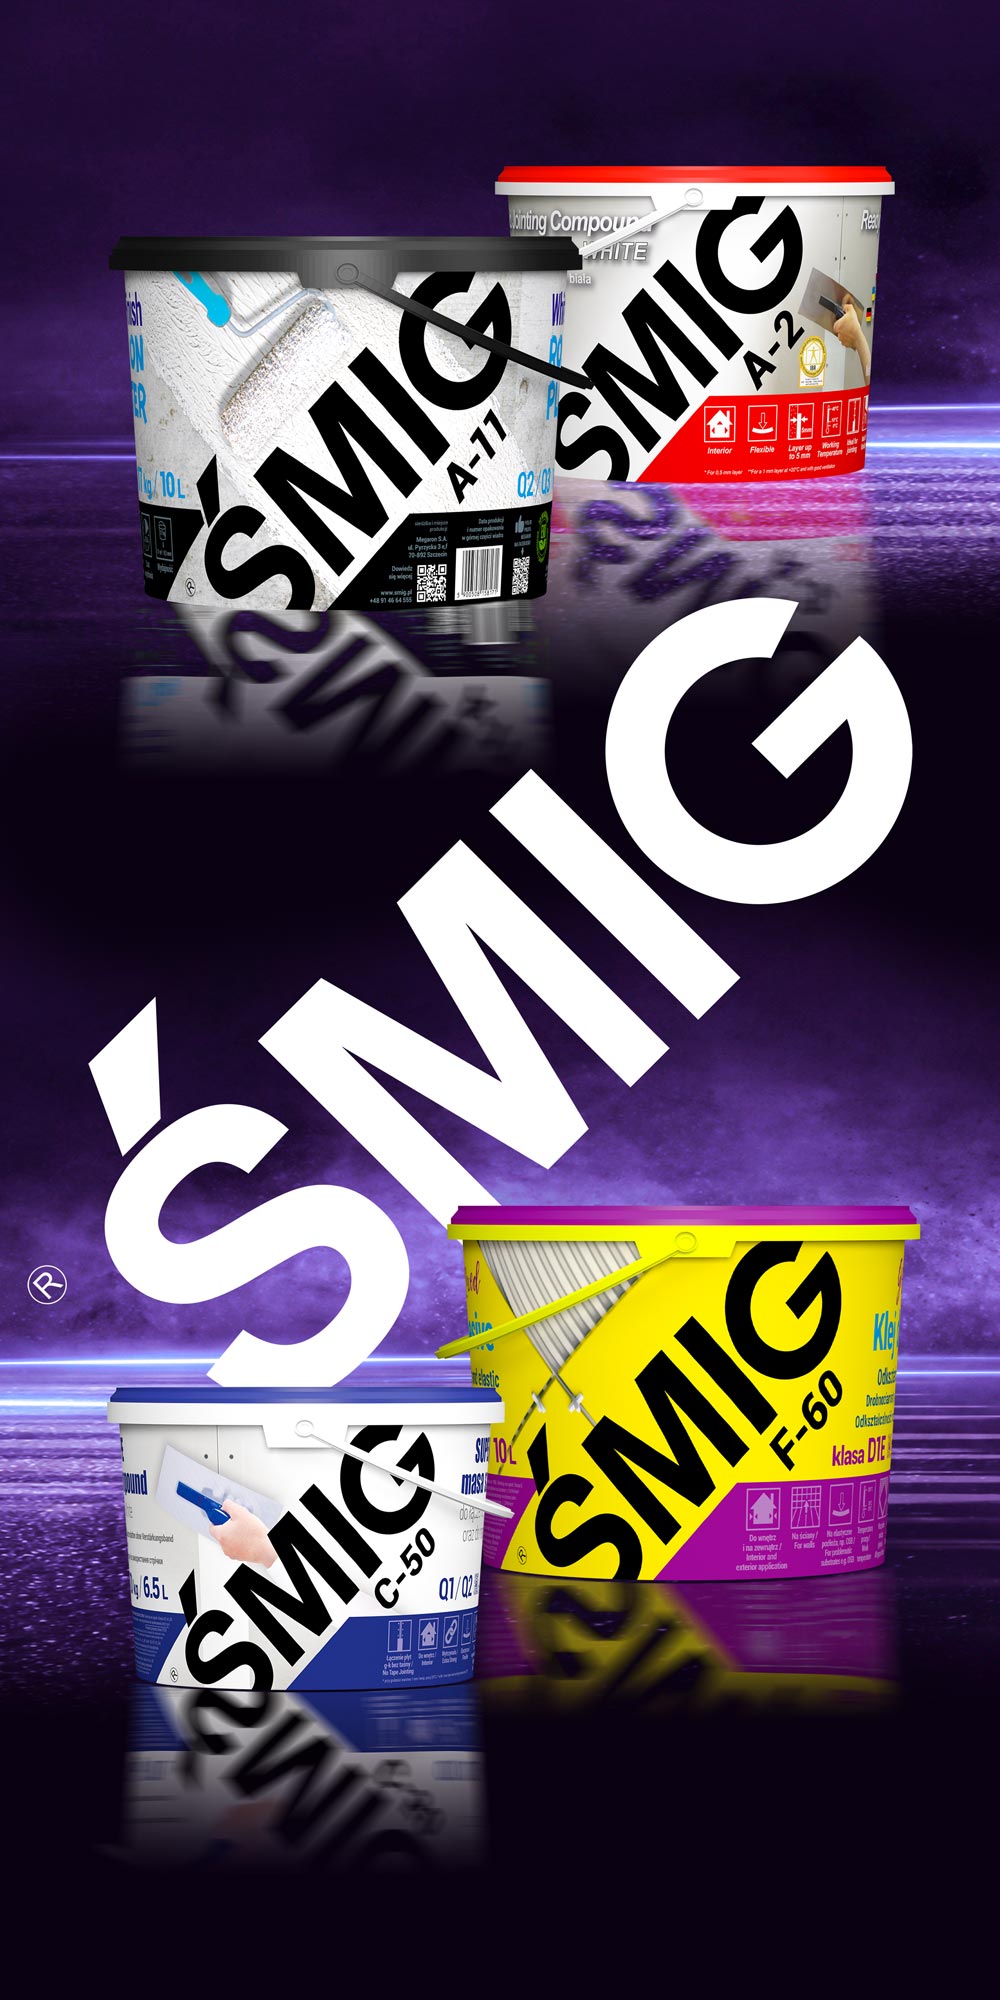 ŚMIG products on black background